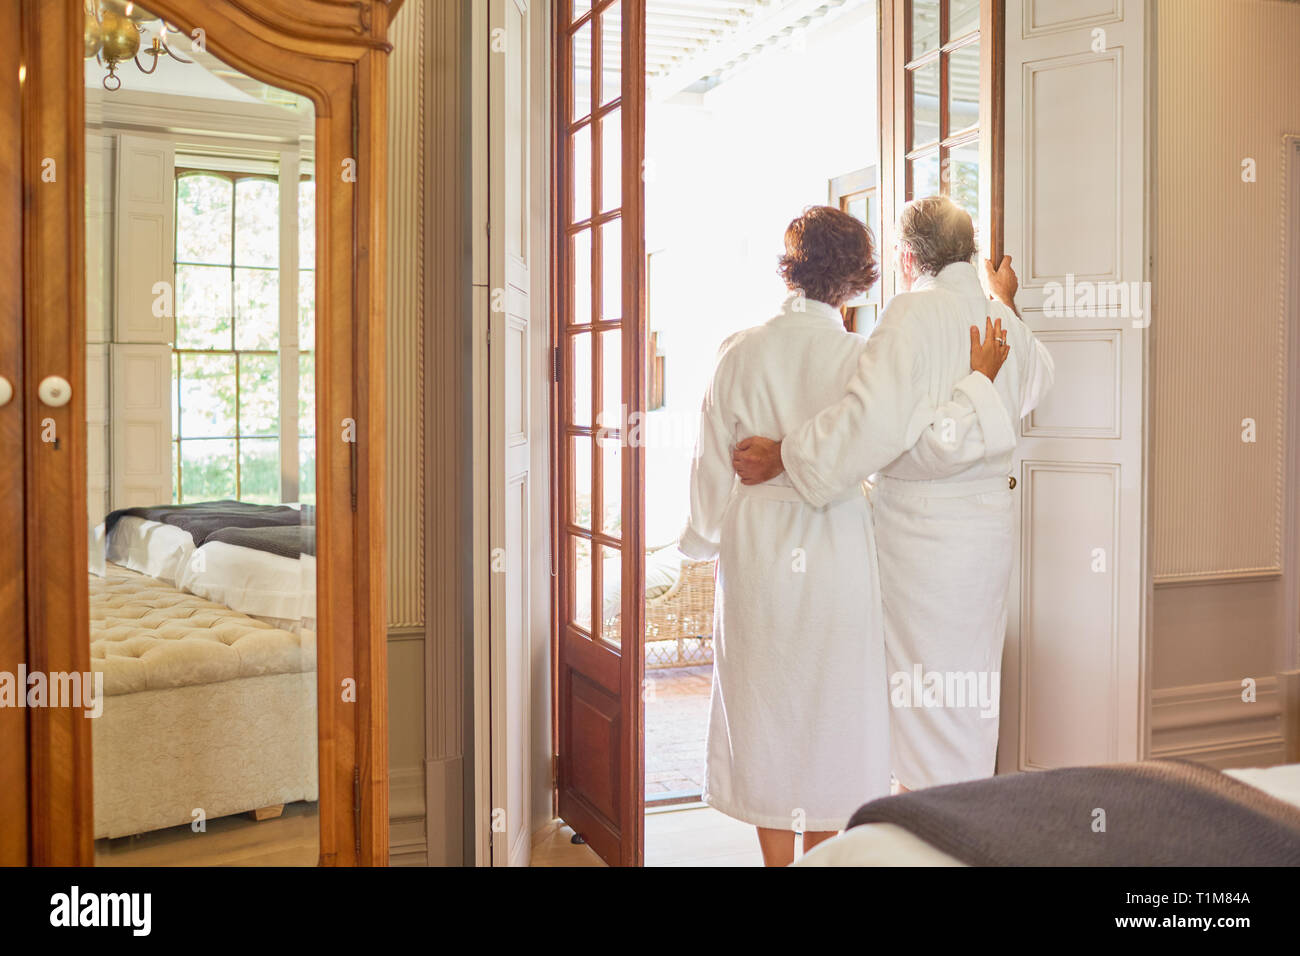 Mature couple in spa bathrobes standing at hotel balcony doorway Stock Photo